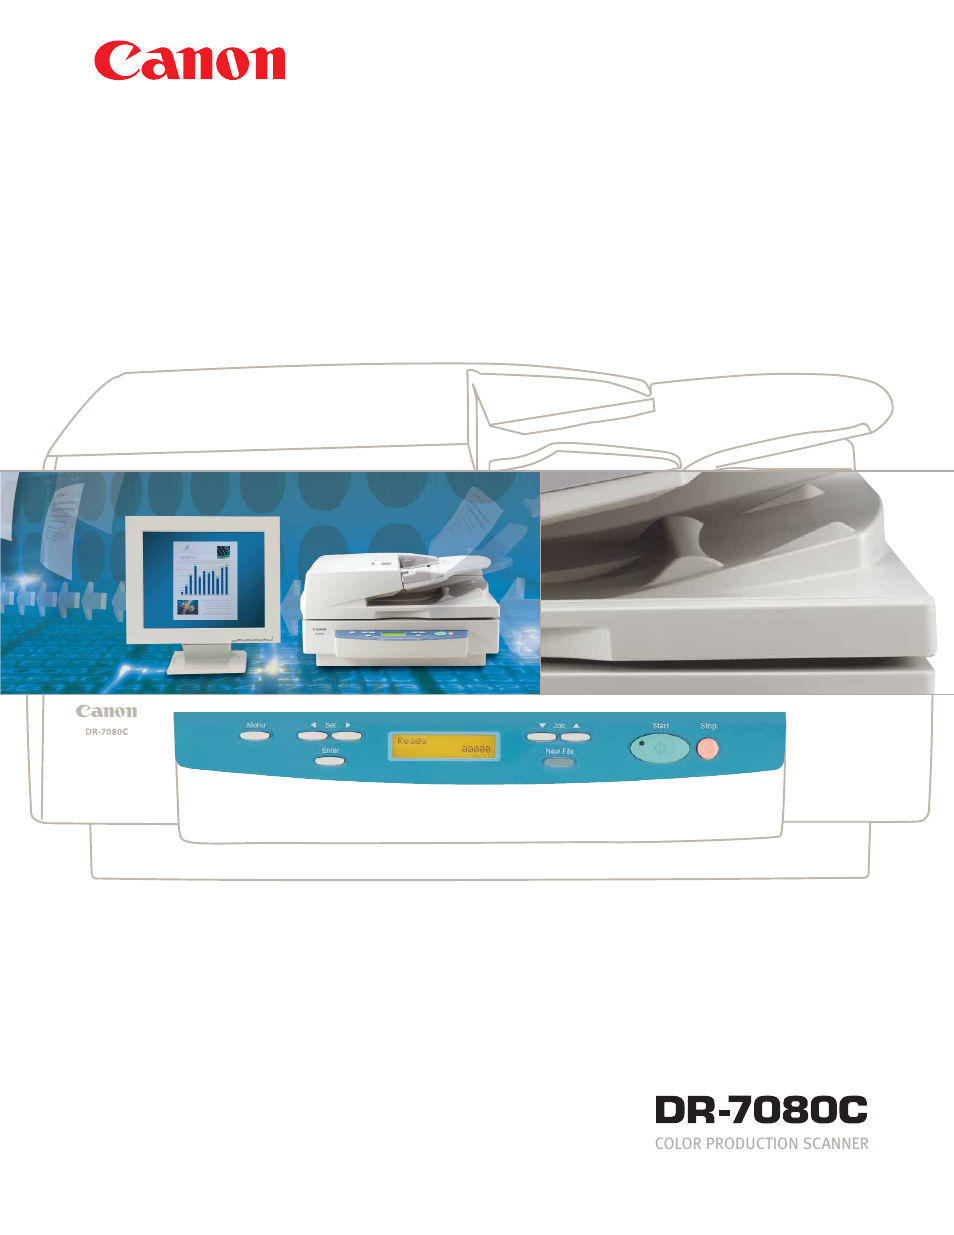 Canon COLOR PRODUCTION SCANNER DR-7080C User Manual | 4 pages